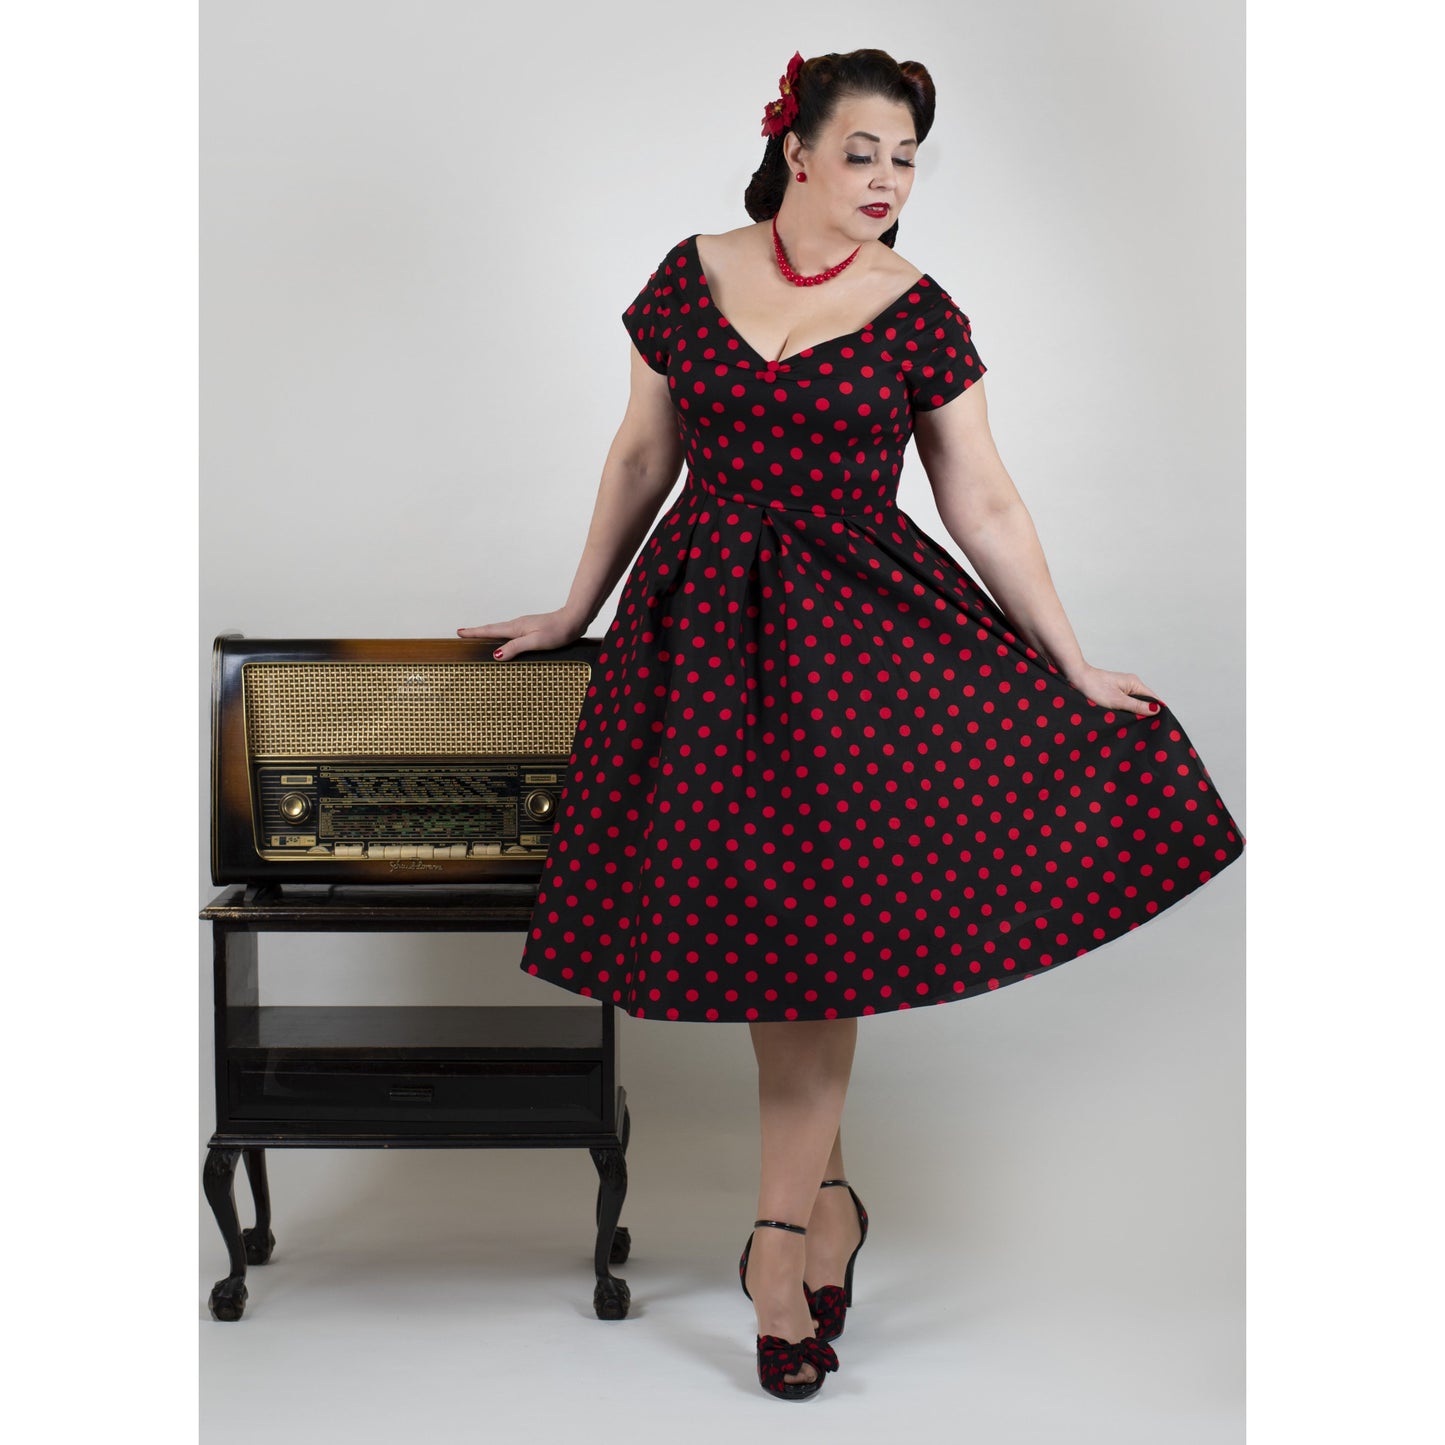 Red Polka Lily Dress